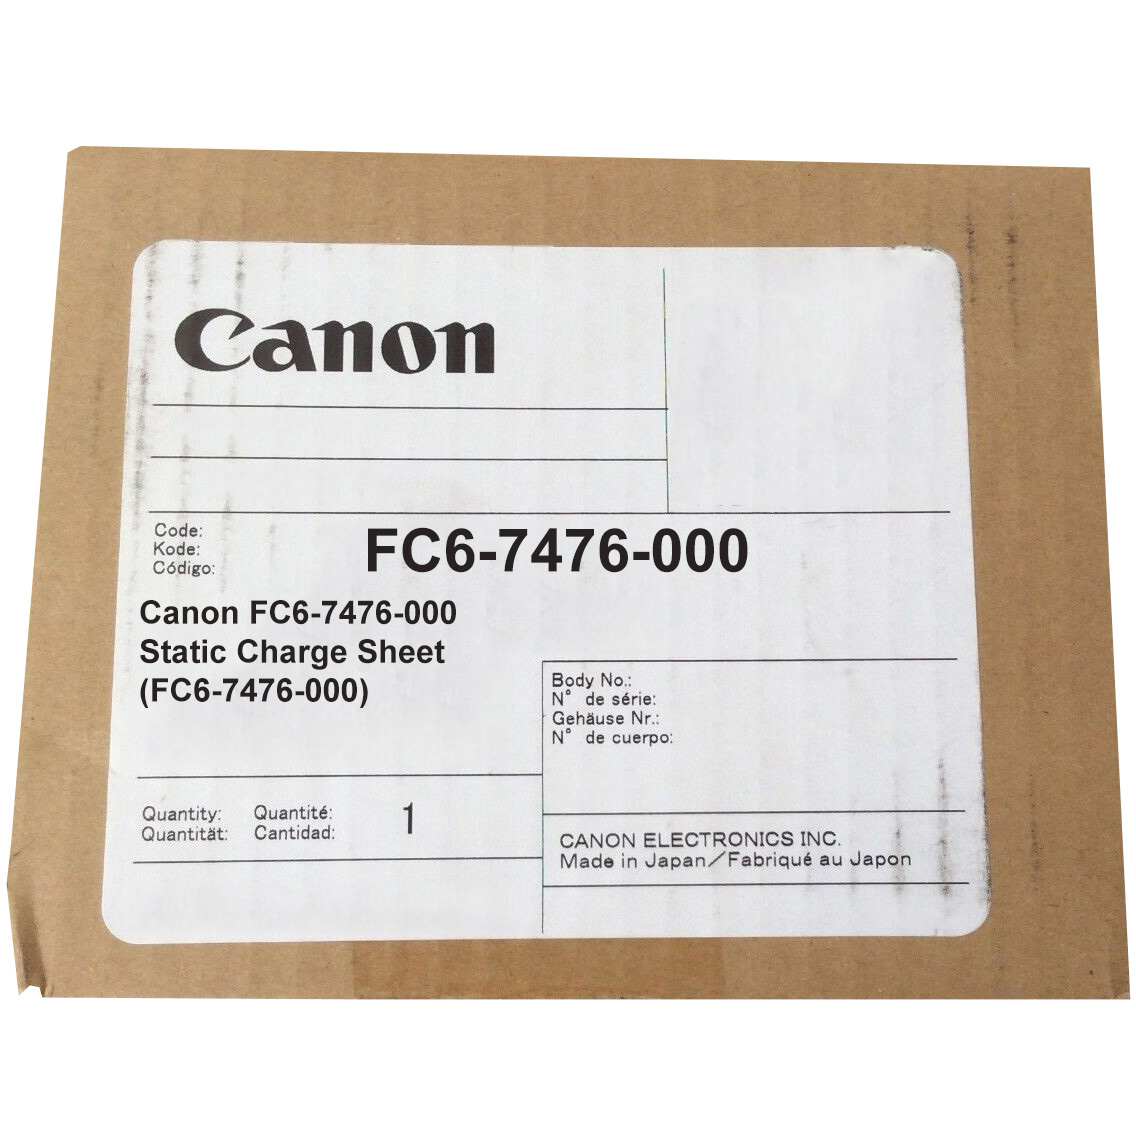 Original Canon FC6-7476-000 Static Charge Sheet (FC6-7476-000)